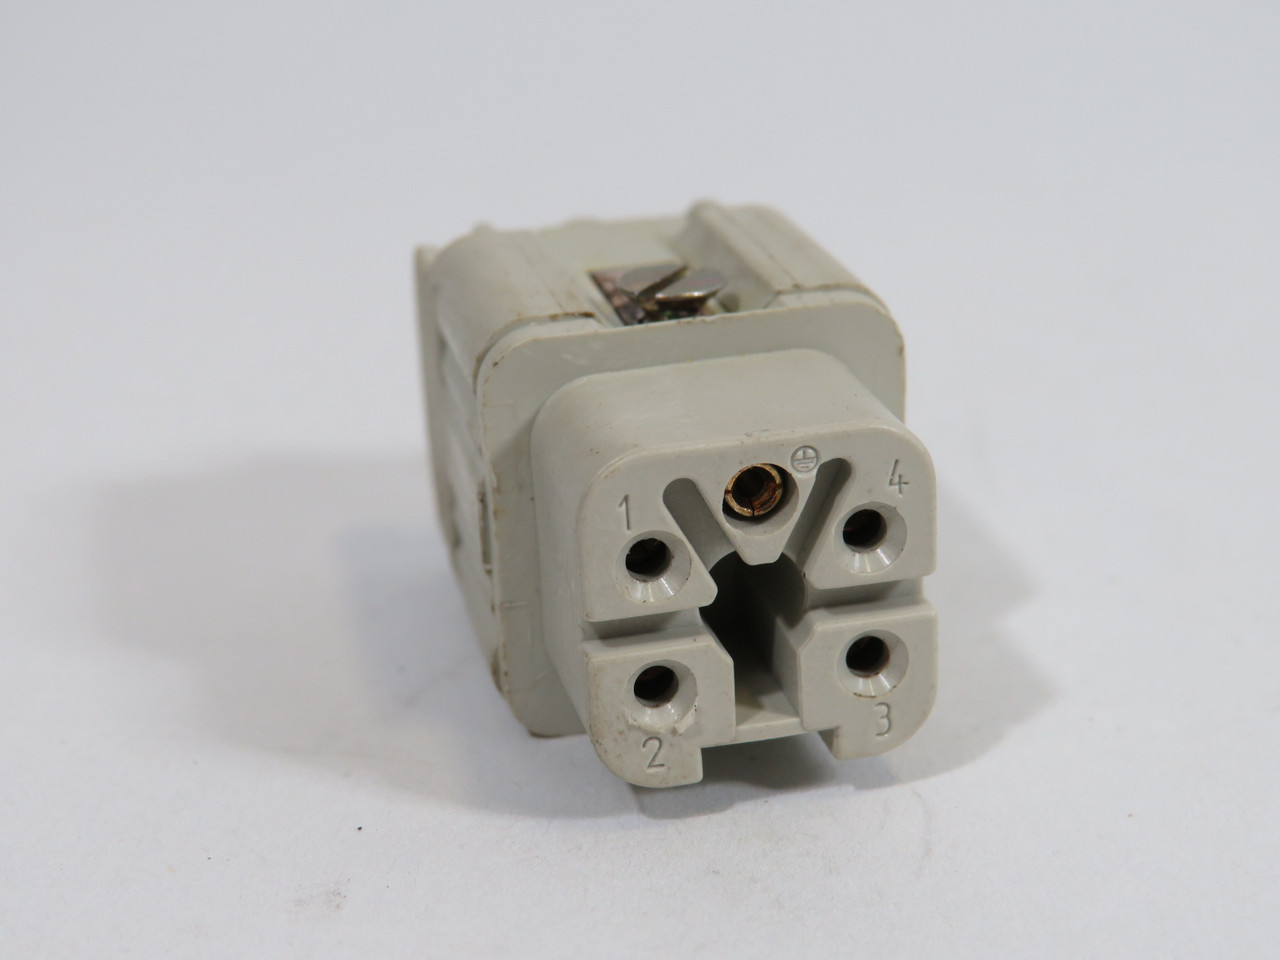 Epic 10432000 HA-4 BS Screw Termination Receptacle 600V 10A USED